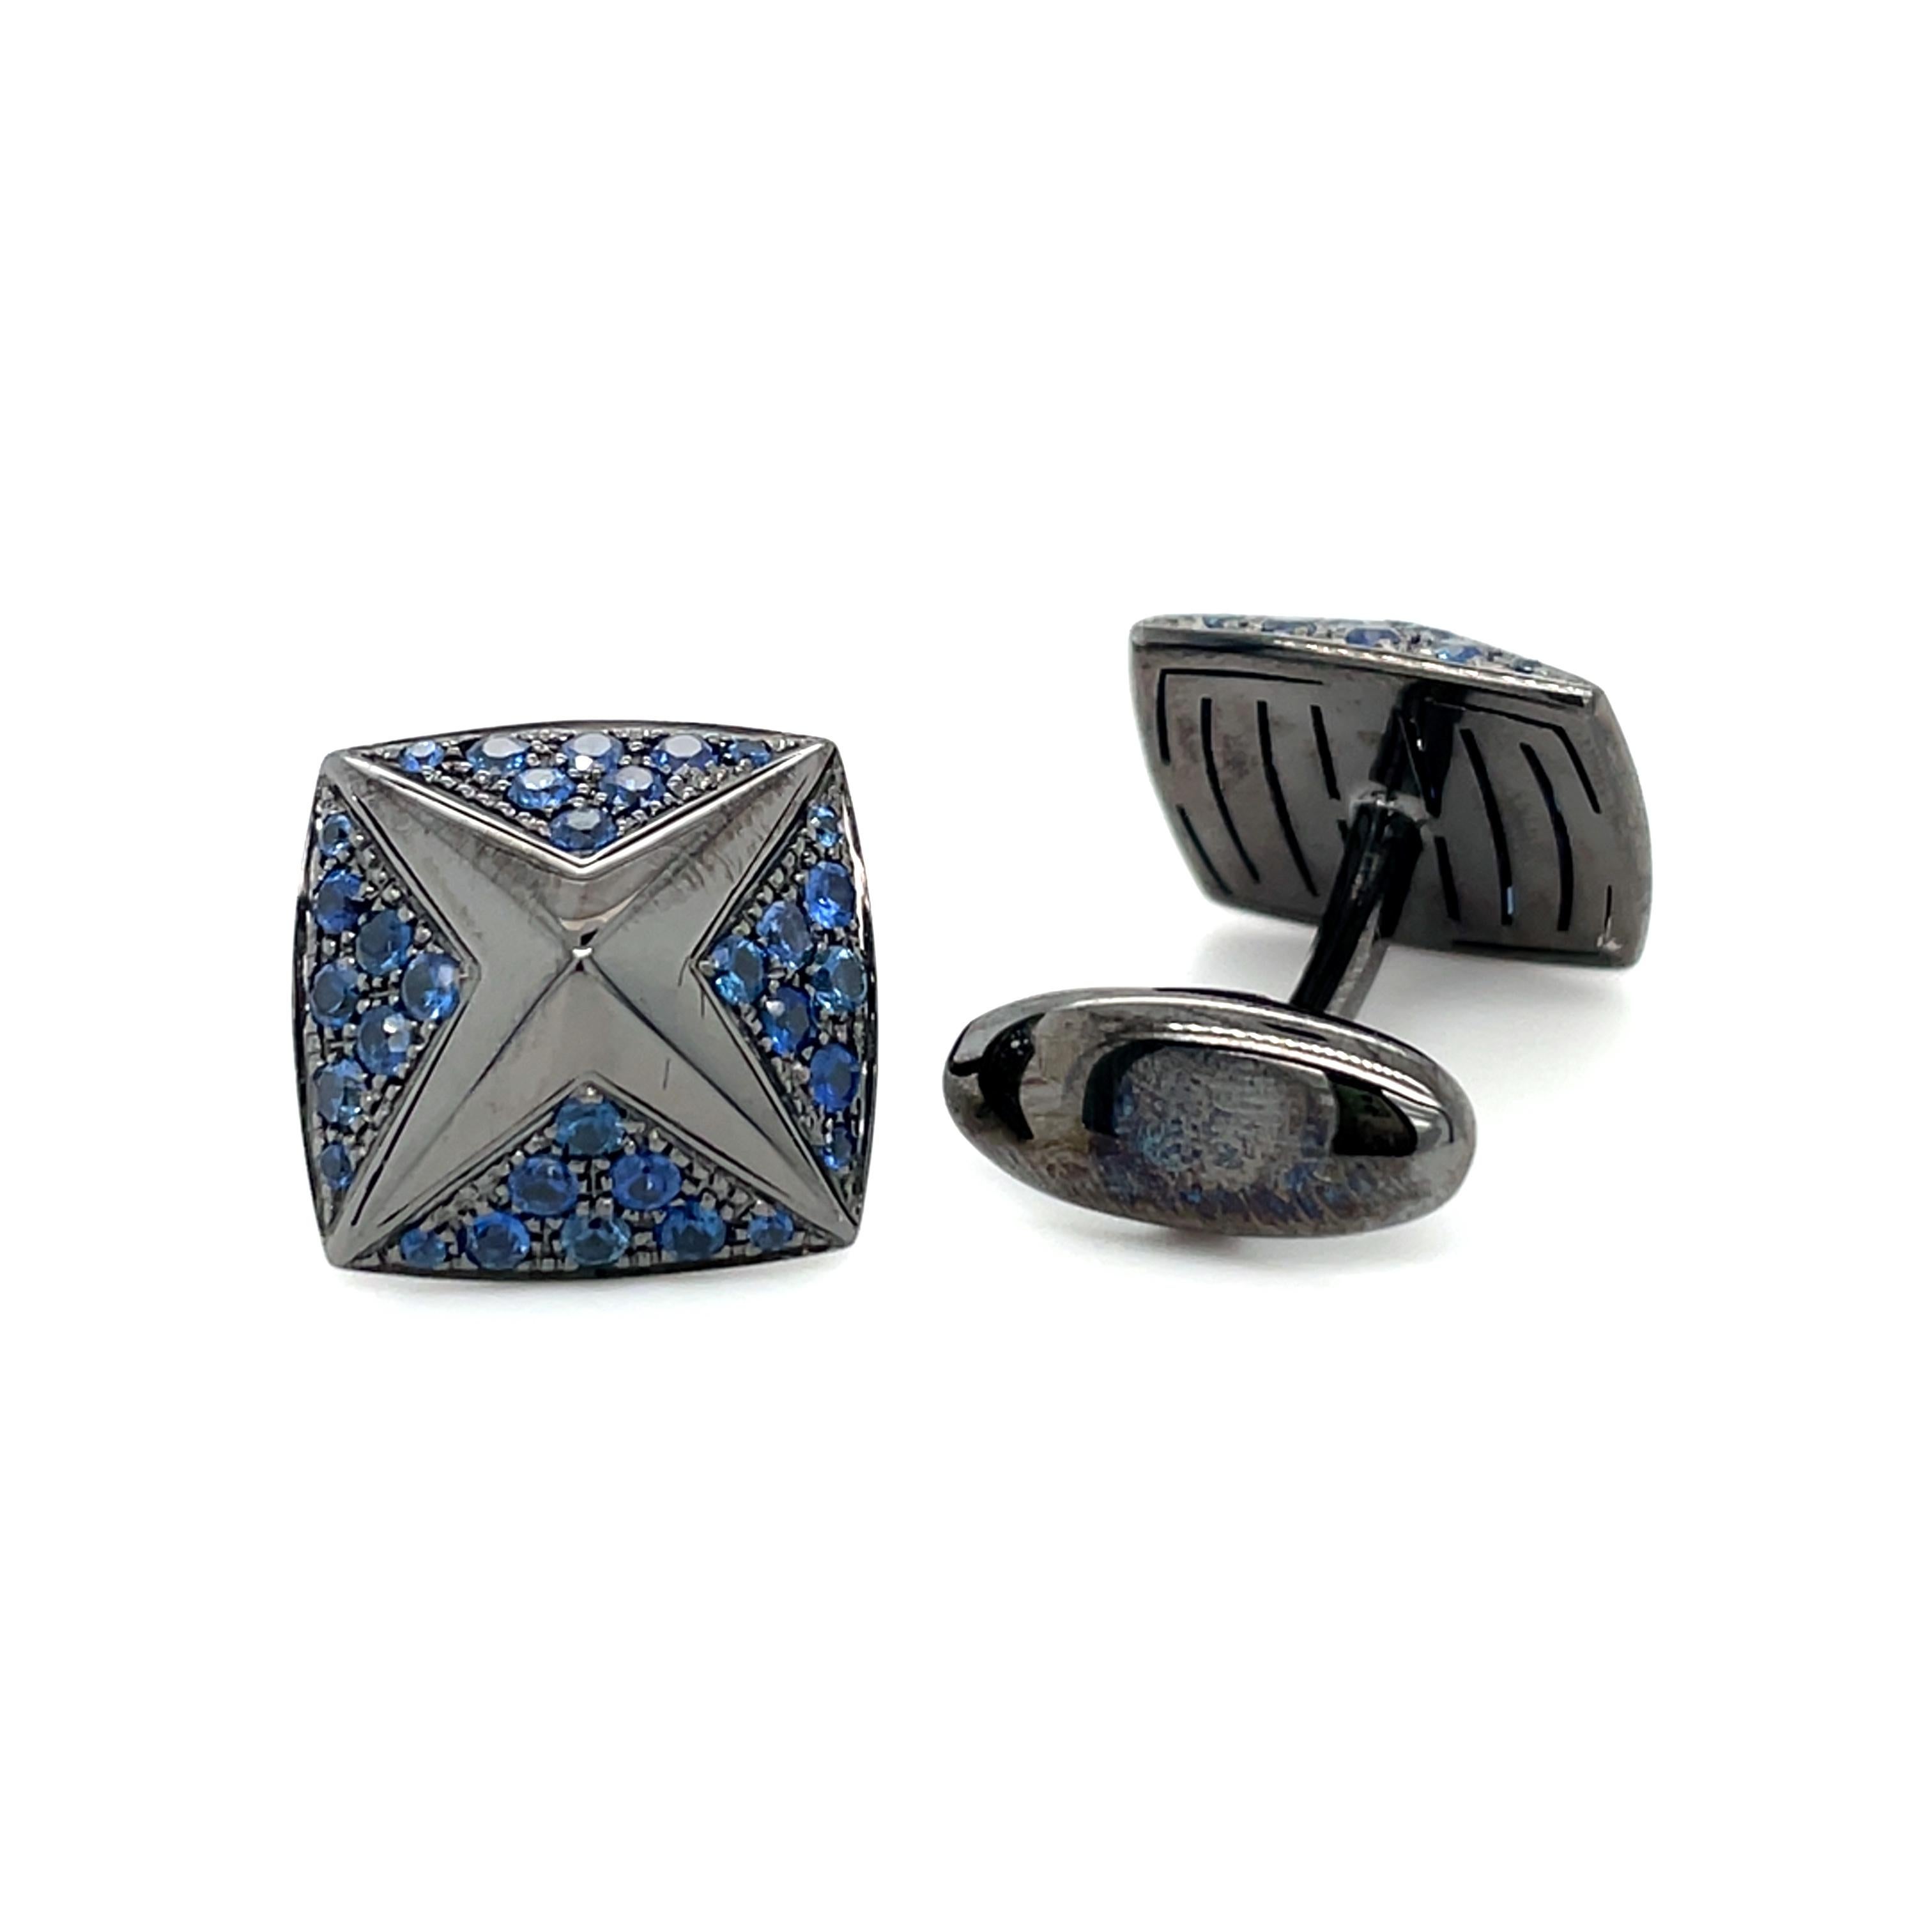 These  White gold Black rhodium cufflinks are from Men's Collection. These black rhodium cufflinks are decorated with Blue sapphires. The total amount of diamonds is 1.77 Carat. The dimensions of the cufflinks are 1.4cm x 1.4cm. These cufflinks are